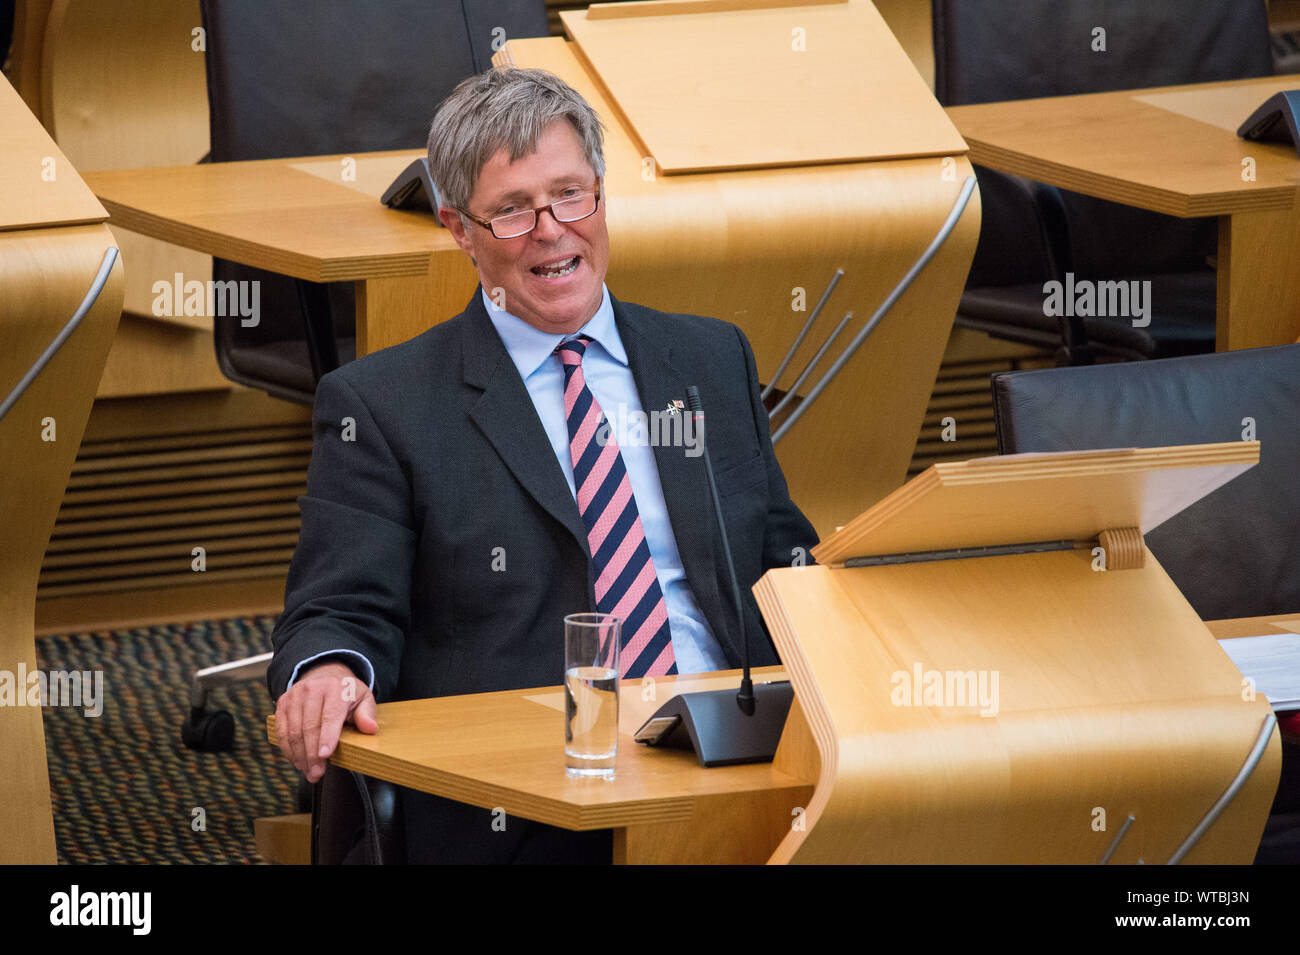 Edinburgh, UK. 5 September 2019. Pictured: Edward Mountain MSP - Shadow Cabinet Secretary for Rural Affairs and the Islands. Scottish Government Debate: Avoiding A No Deal Exit From The EU.  That the Parliament agrees that the UK should in no circumstances leave the EU on a no-deal basis, and condemns the Prime Minister’s suspension of the UK Parliament from as early as 9 September until 14 October 2019. The result of the division is: For 87, Against 28, Abstentions 0. Colin Fisher/CDFIMAGES.COM Stock Photo